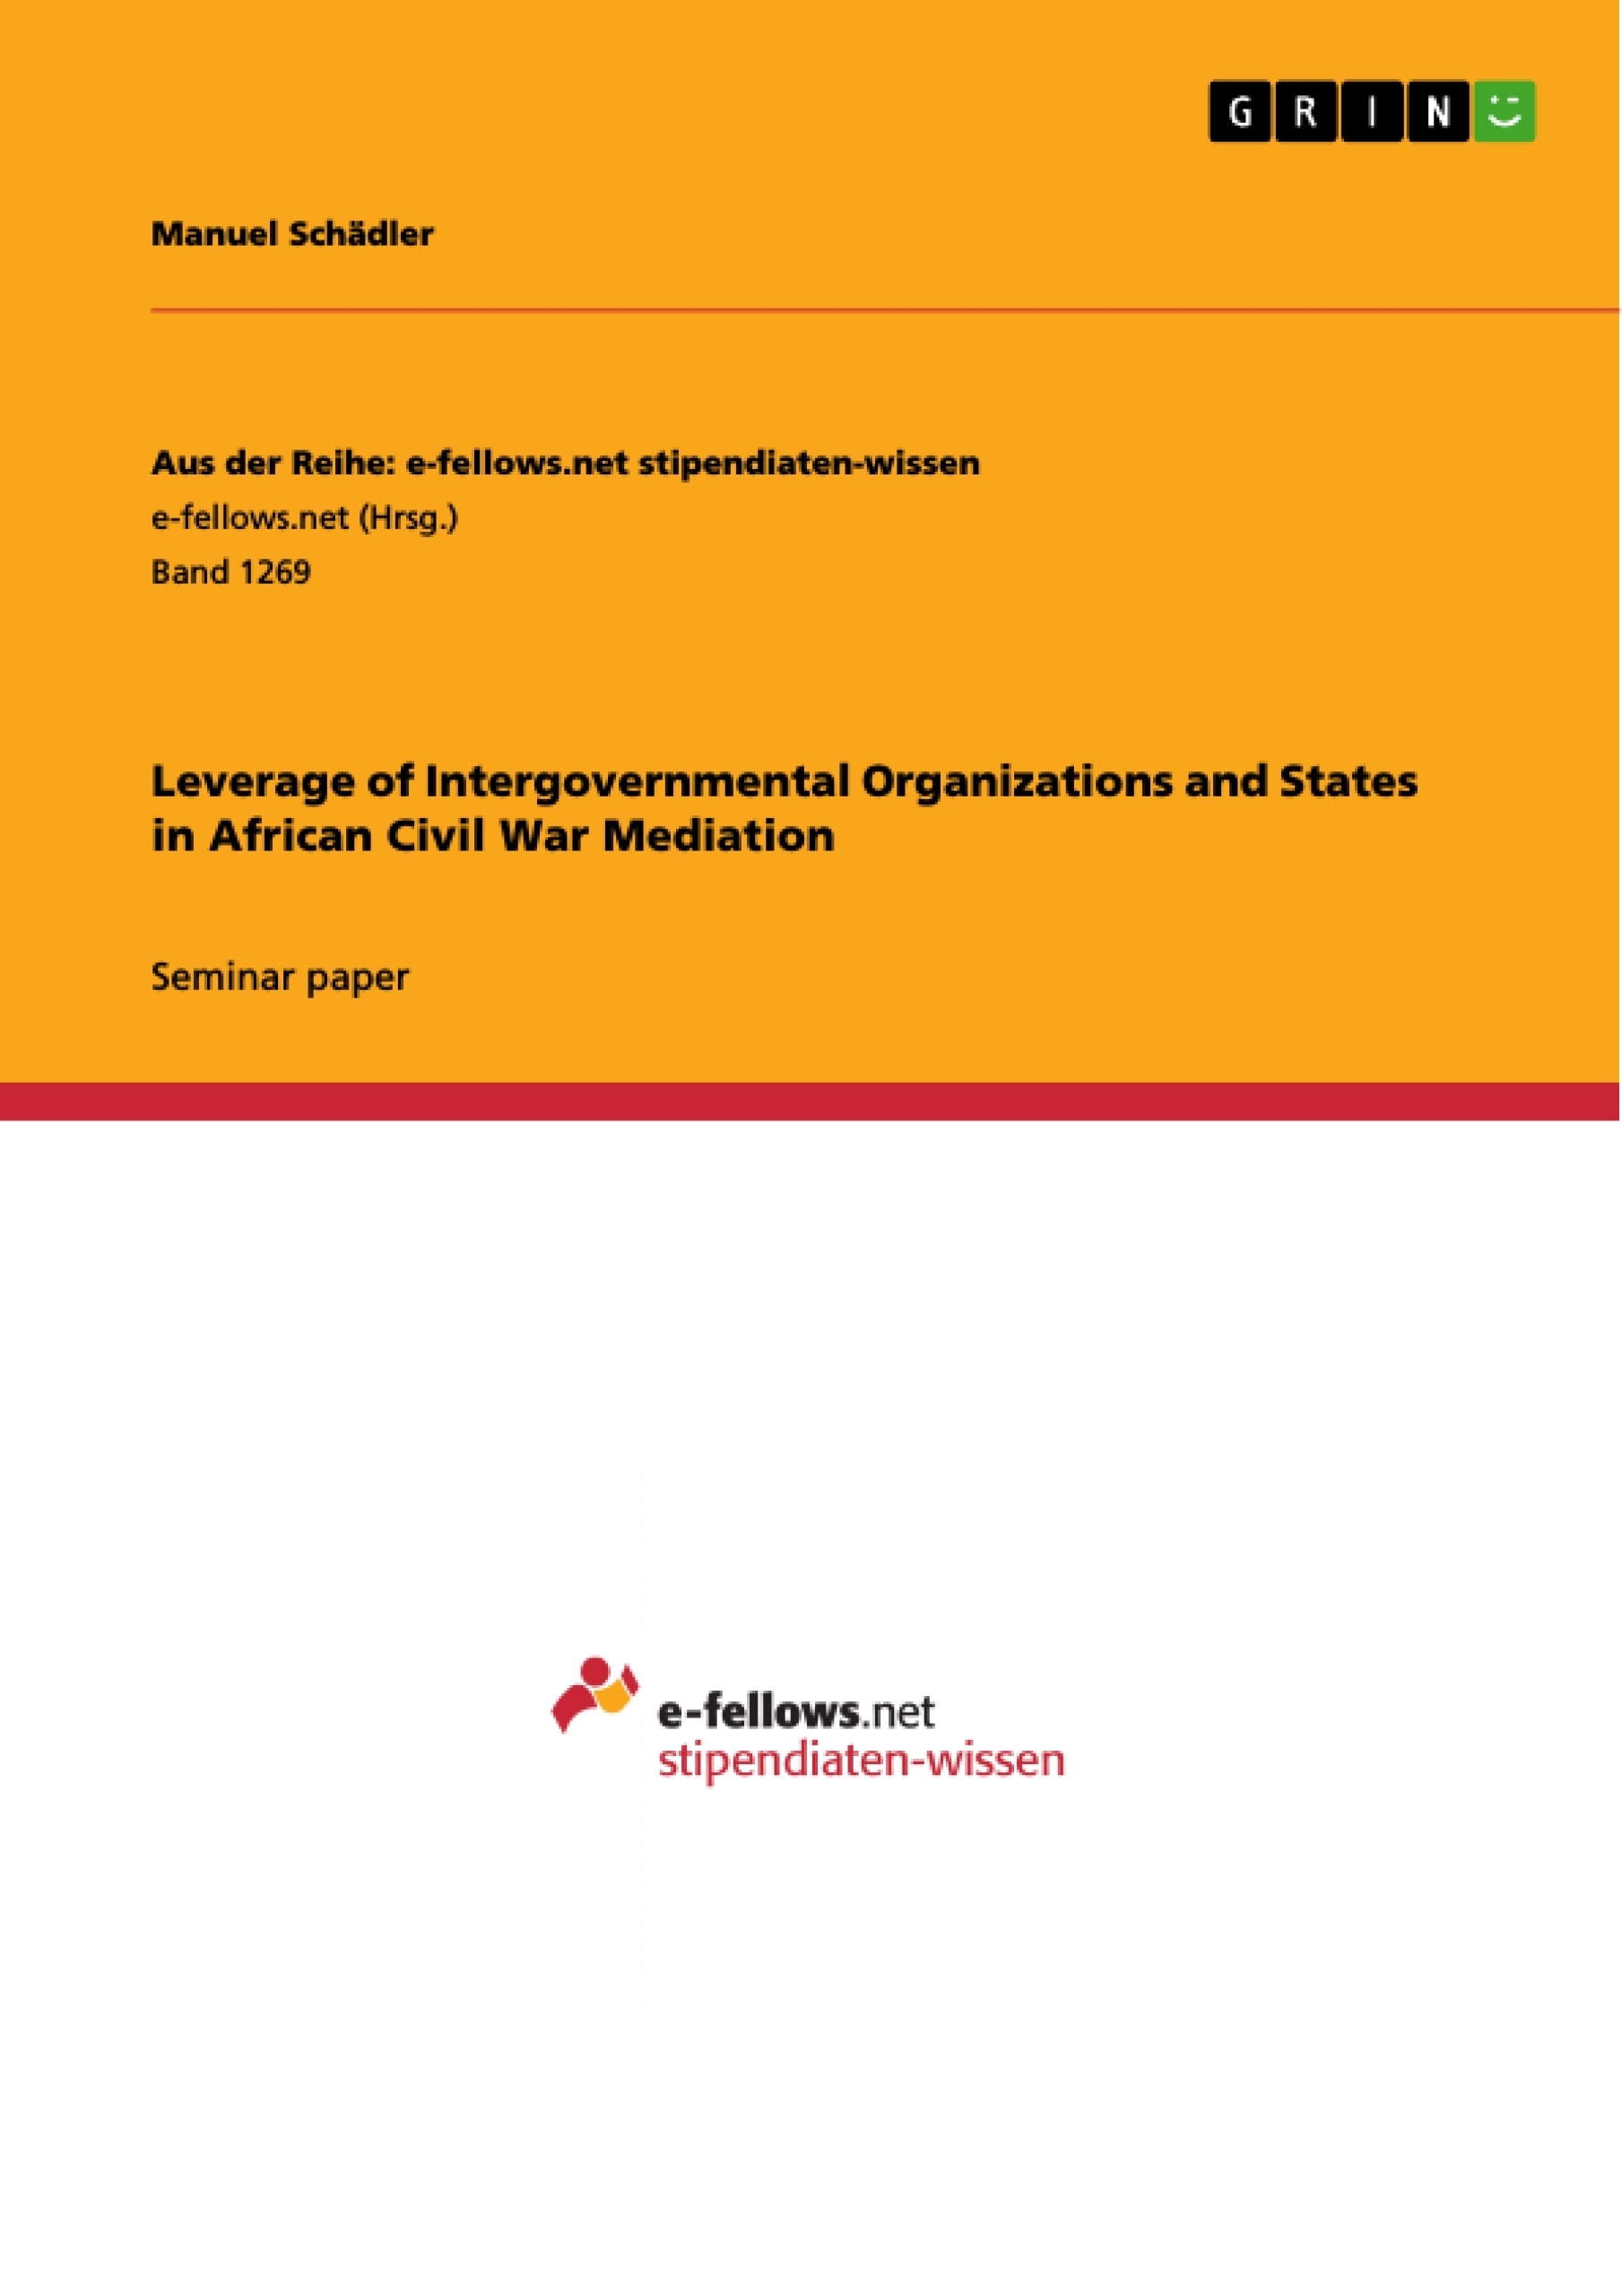 Title: Leverage of Intergovernmental Organizations and States in African Civil War Mediation